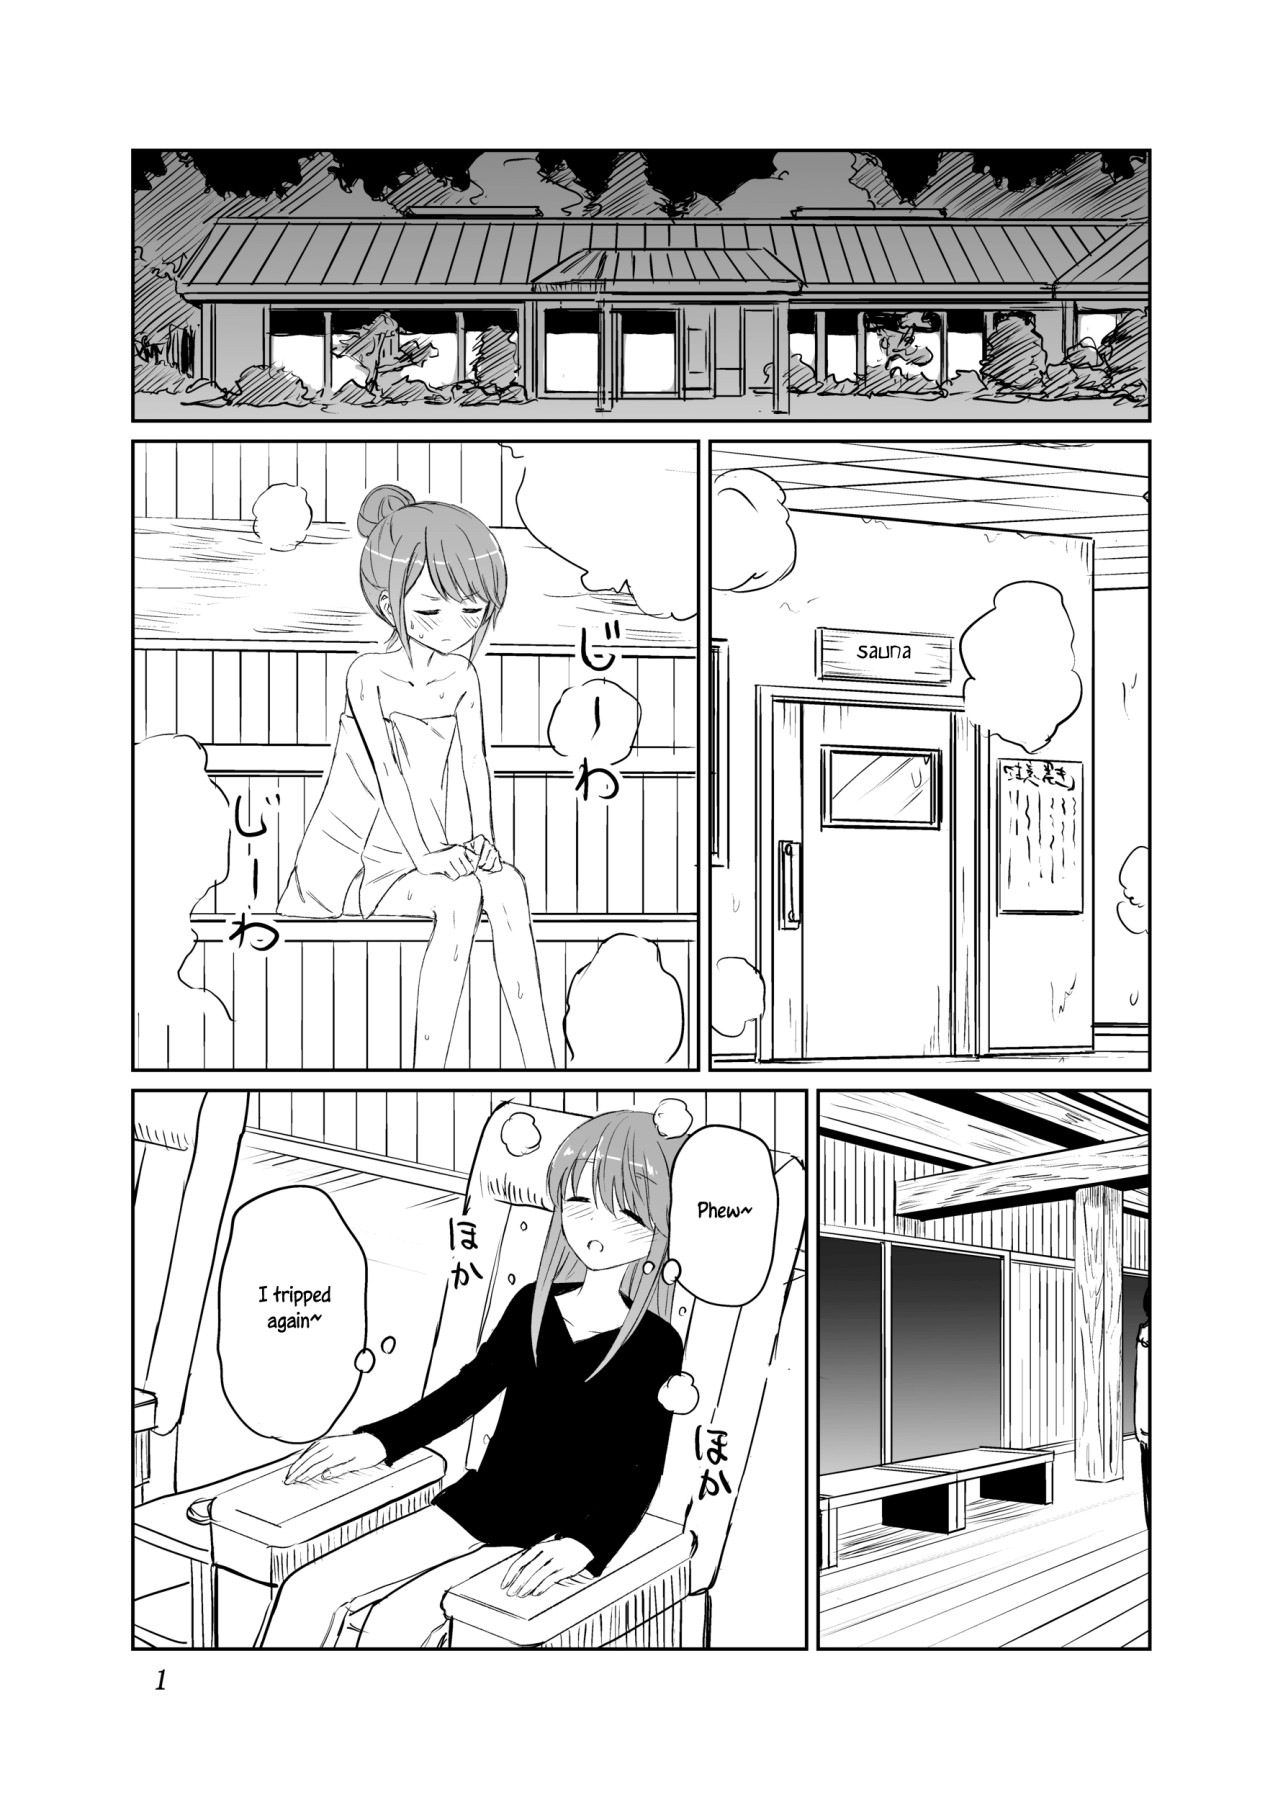 Hentai Manga Comic-We Can Have a Camp Like This Once In a While-Read-2